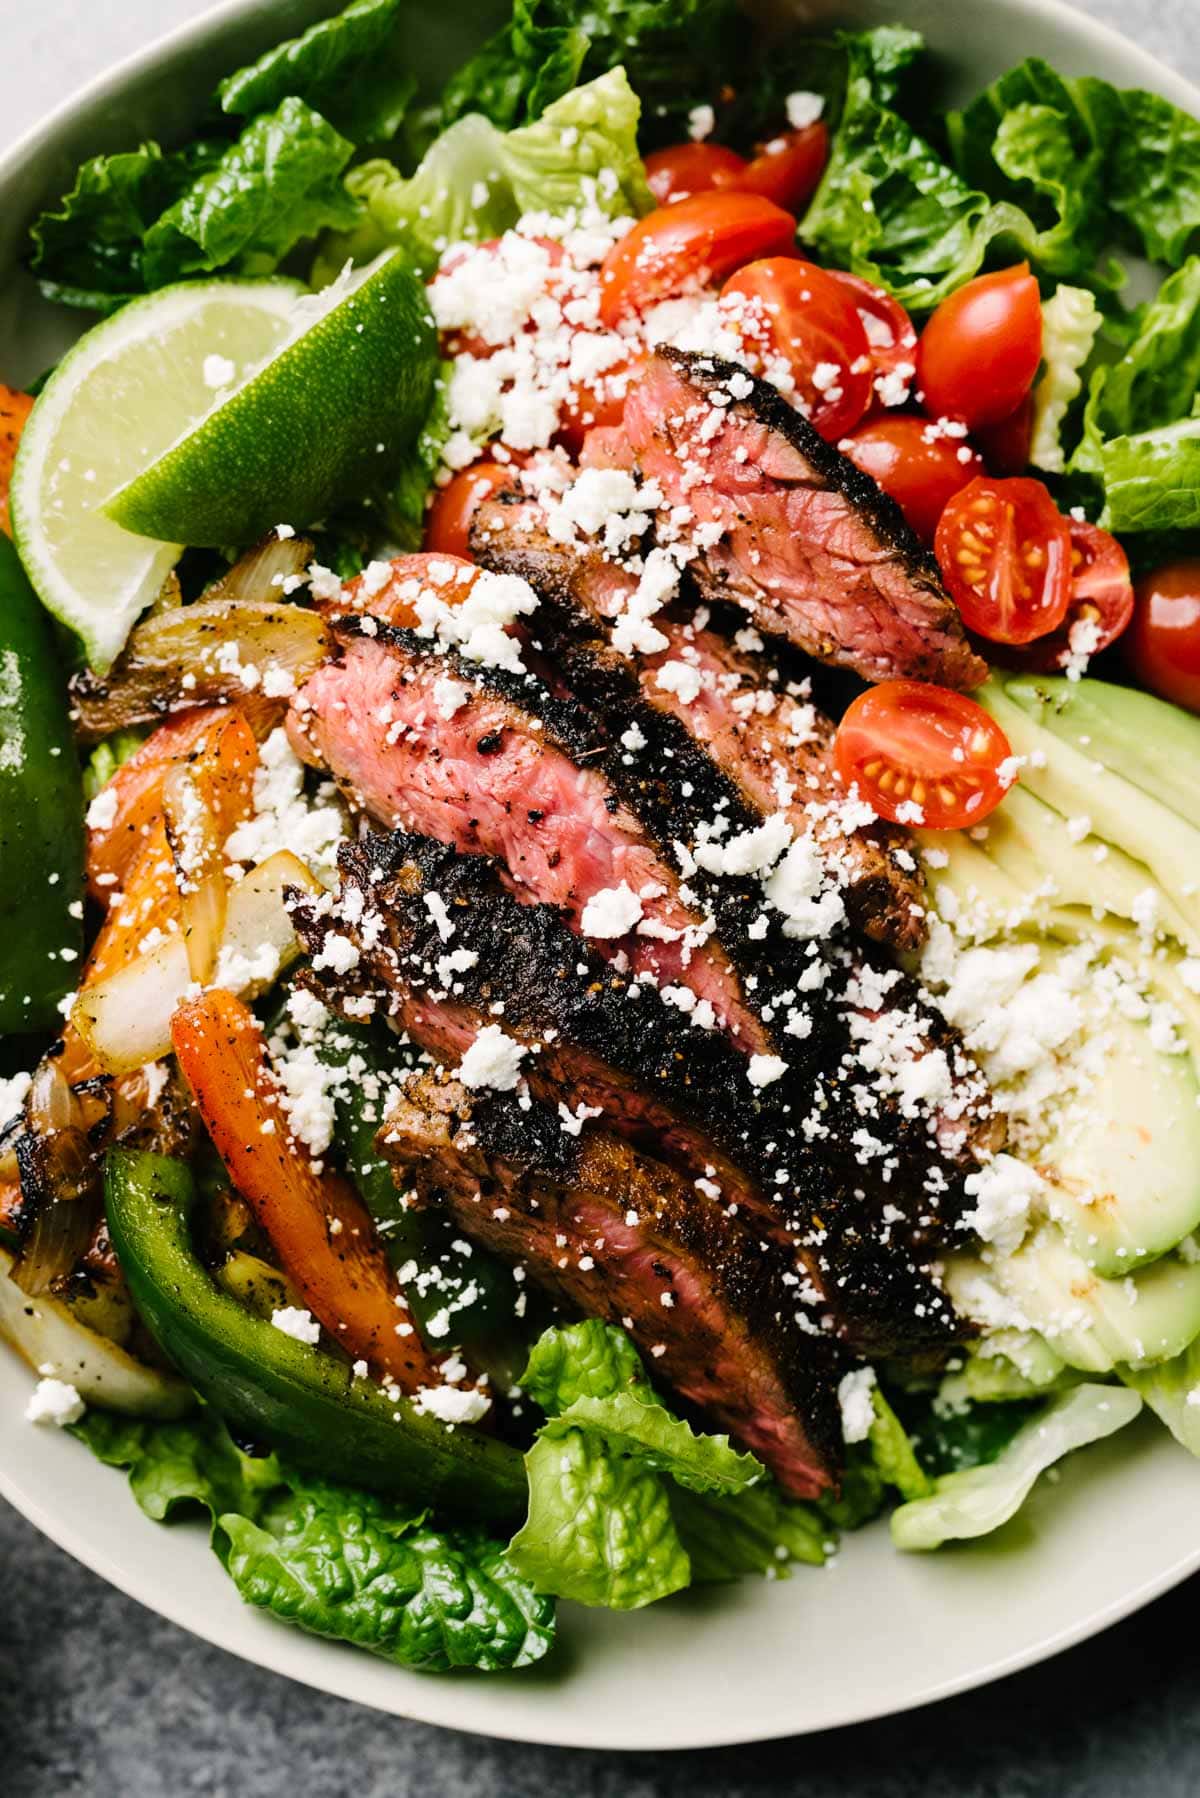 A close-up image of steak fajita salad with seared steak and fajita veggies over romaine lettuce, bell peppers, and sliced avocado, garnished with crumbed queso fresco.